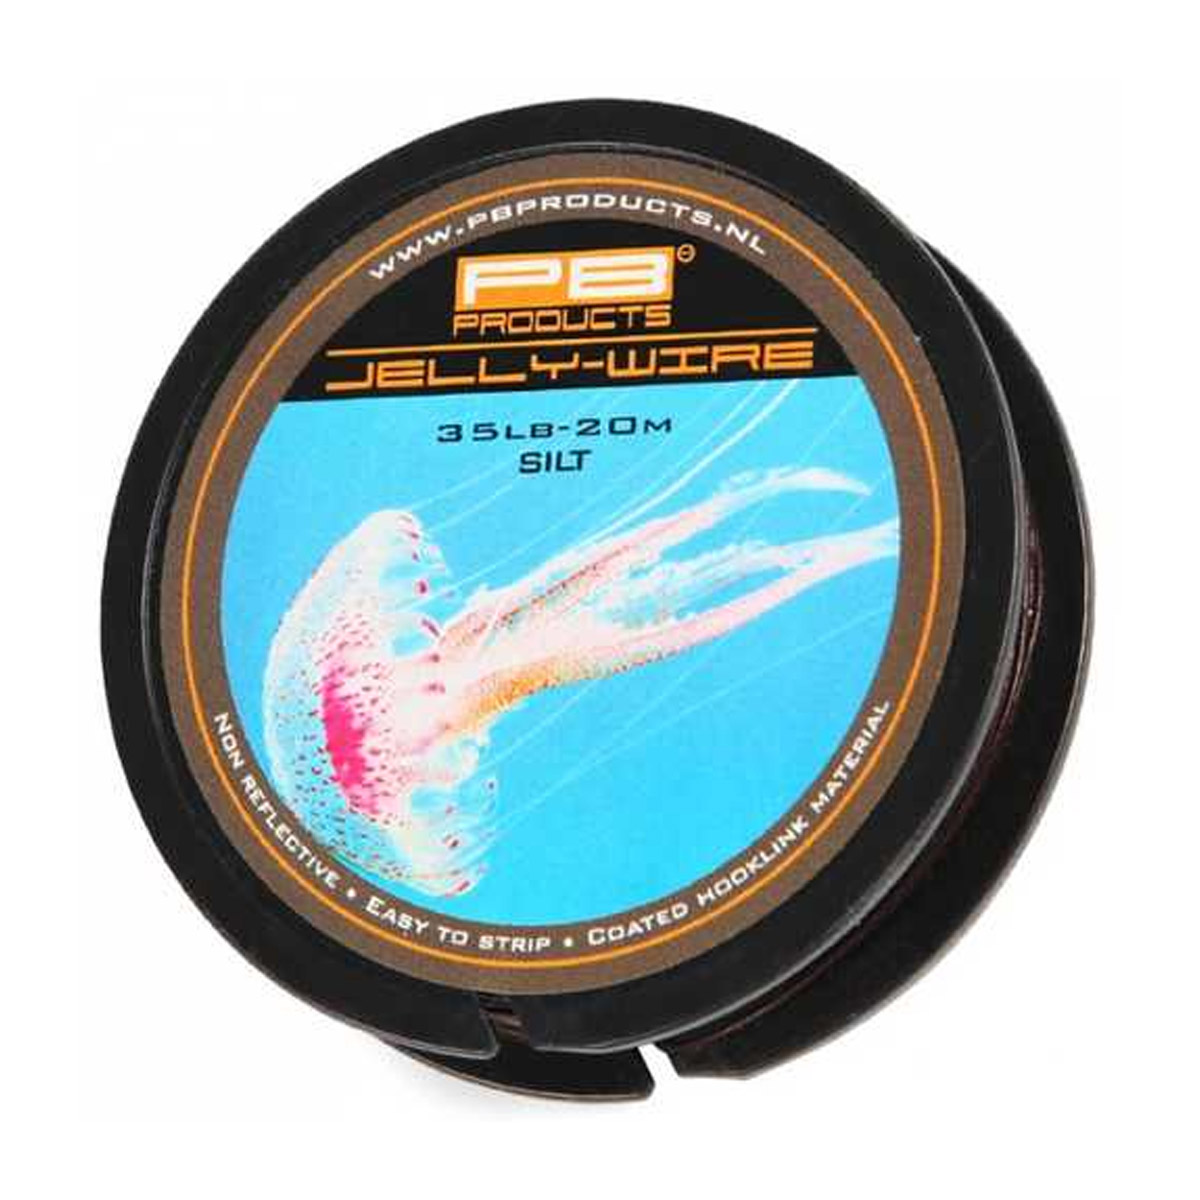 PB Products Jelly Wire Silt